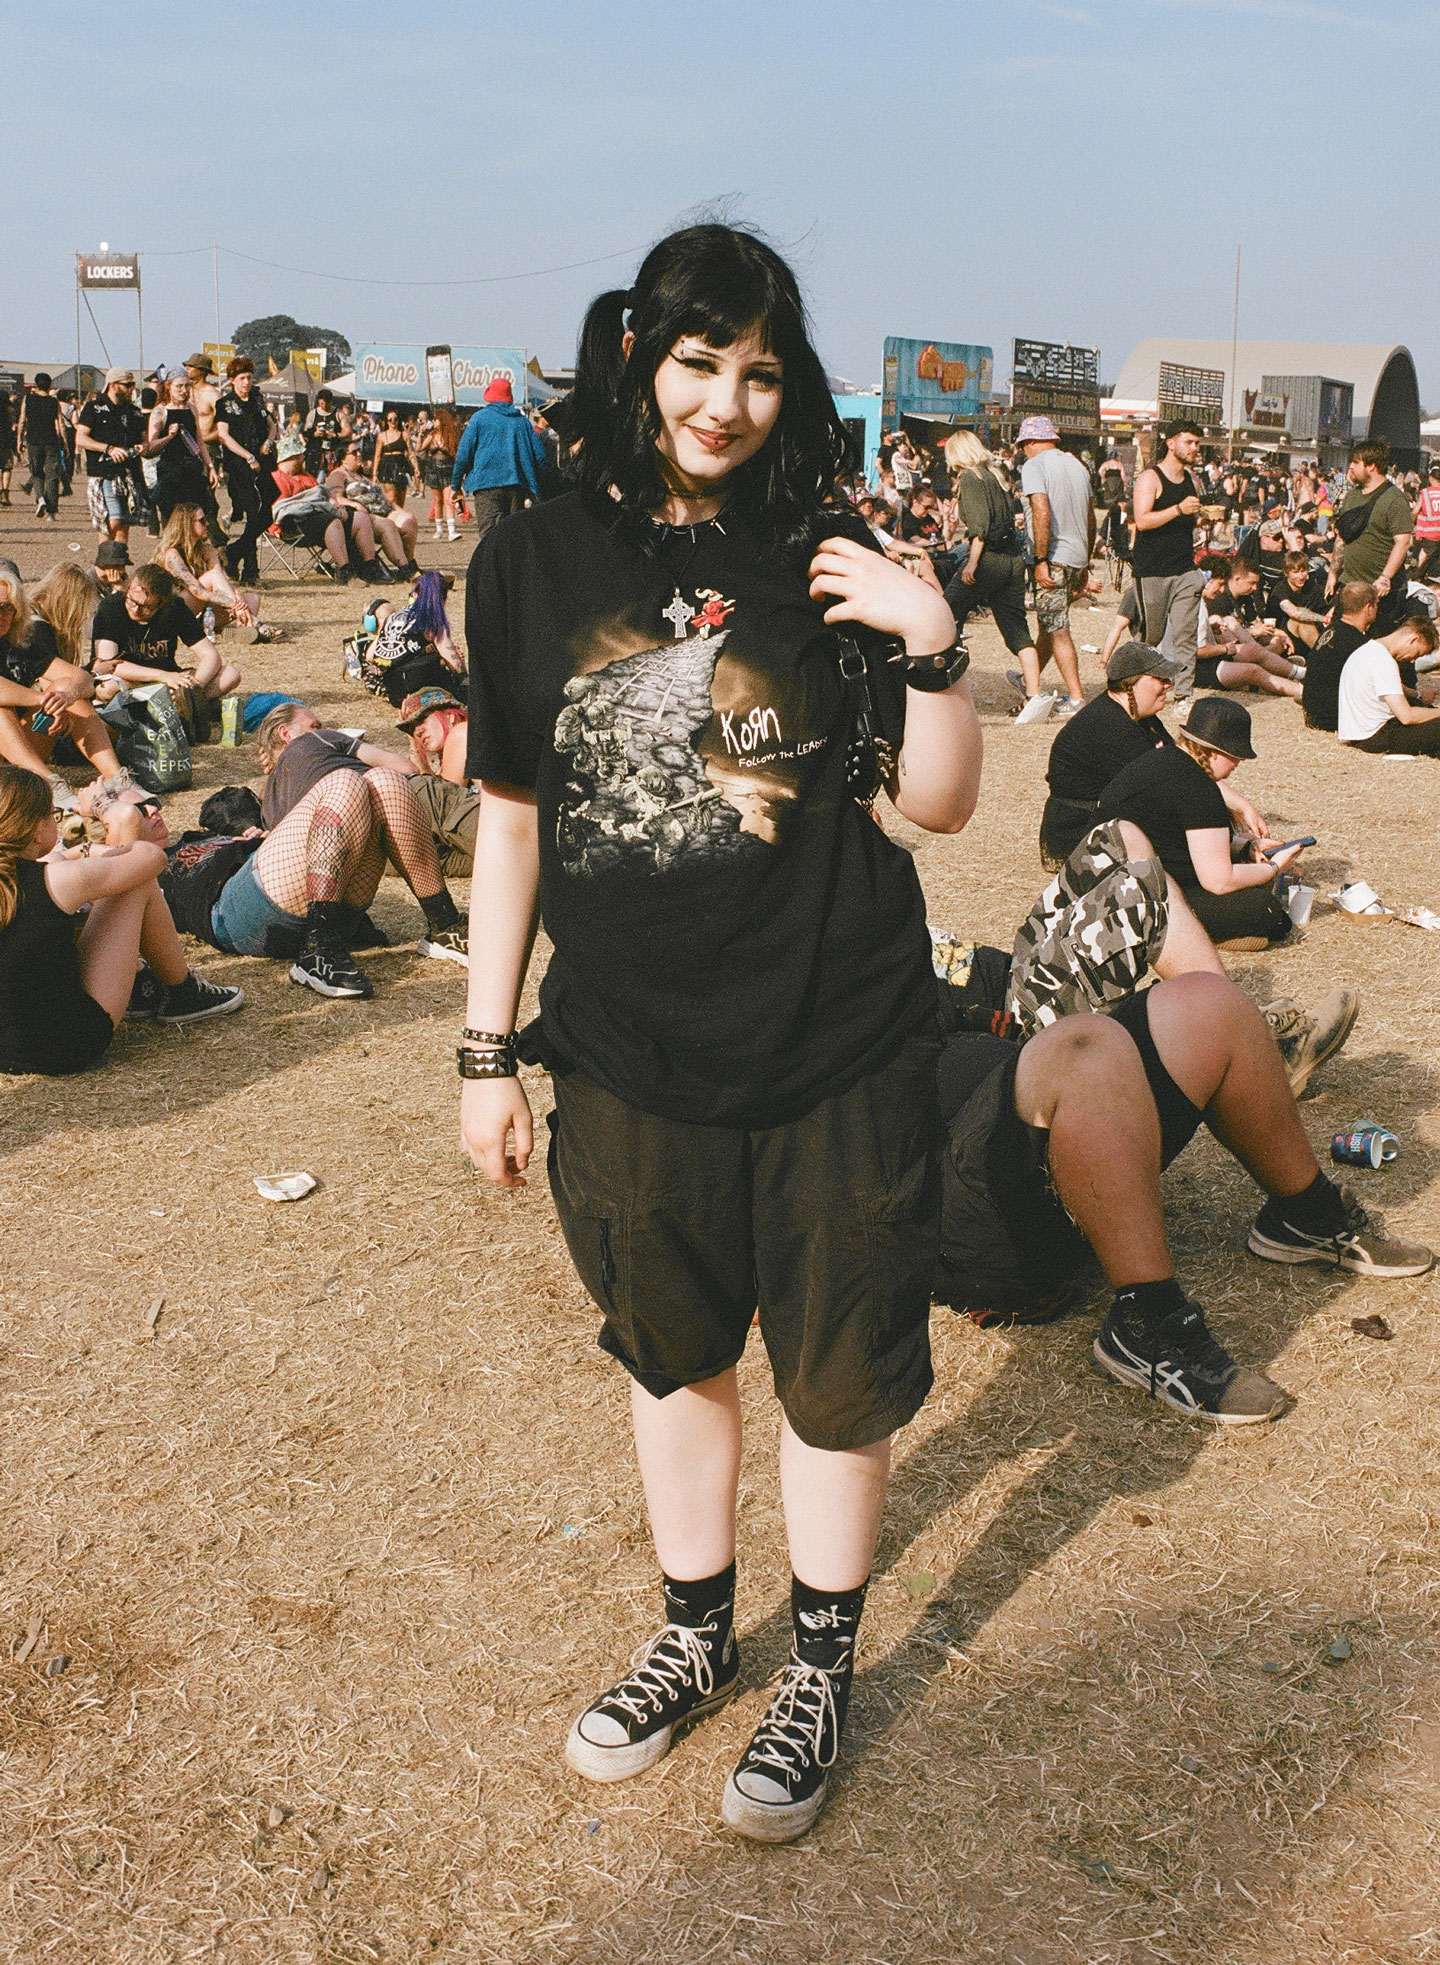 a teen girl with black hair in pigtails, a korn T-shirt and baggy shorts with converse stands in a busy festival field 